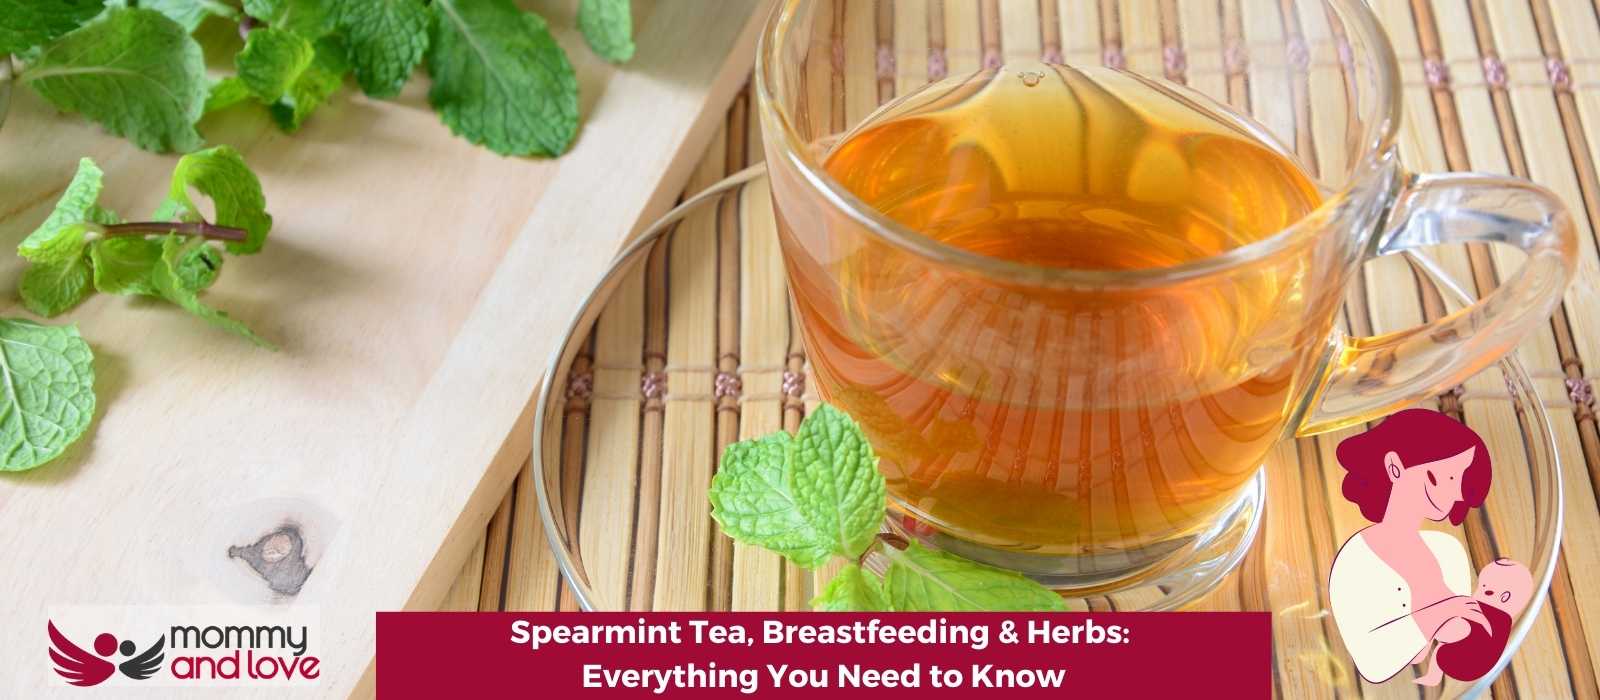 Spearmint Tea, Breastfeeding & Herbs Everything You Need to Know